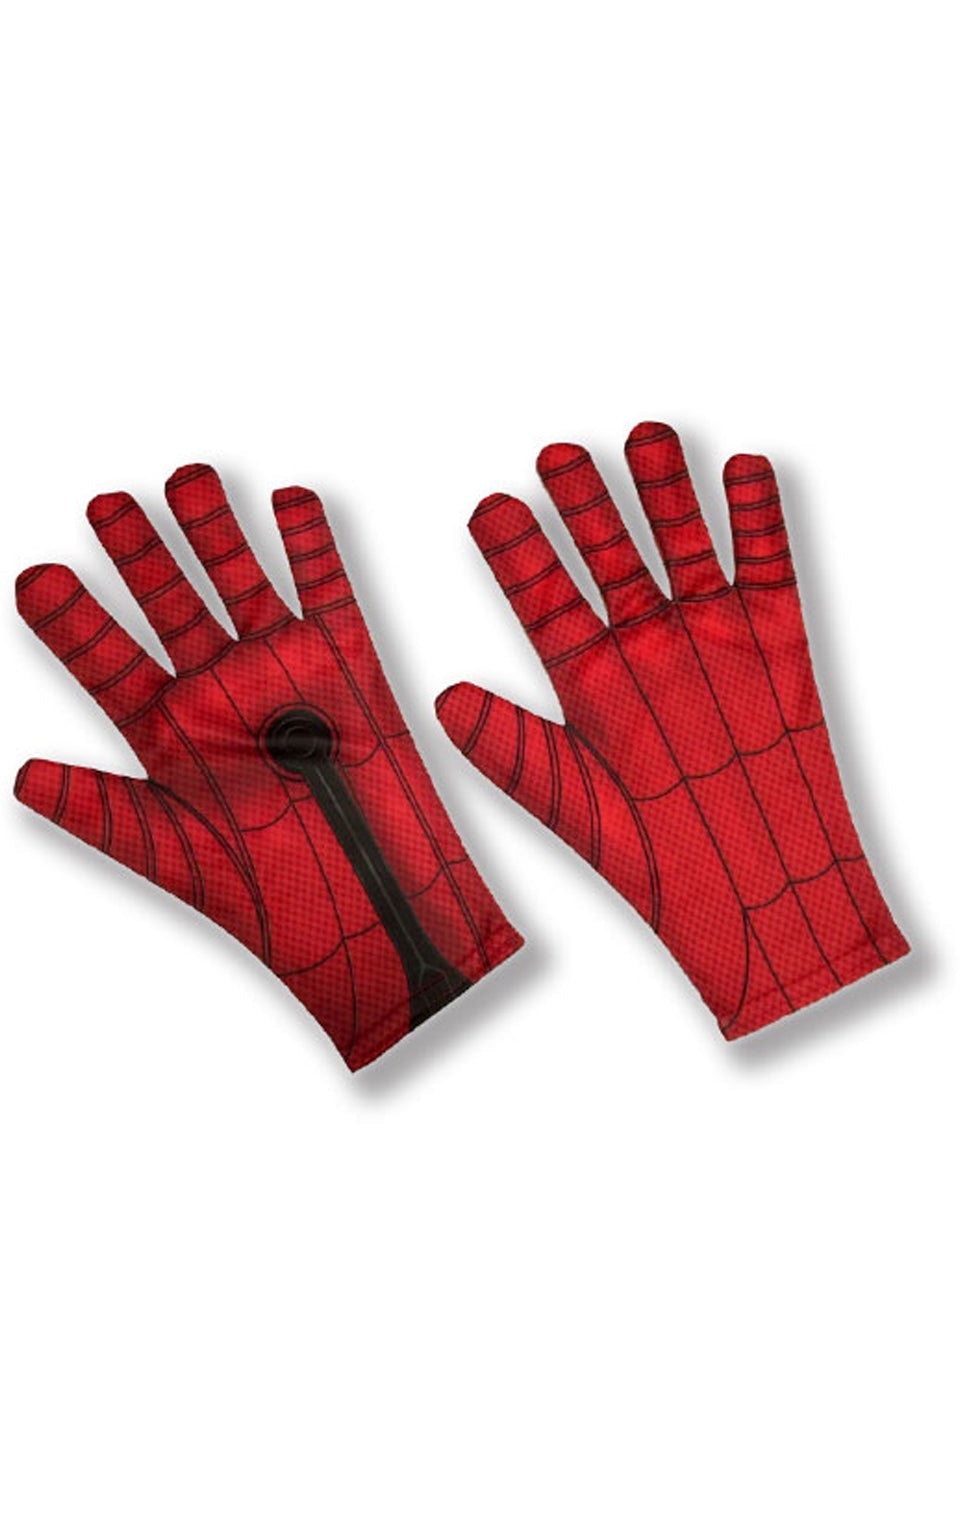 Spiderman Adult Gloves Red_1